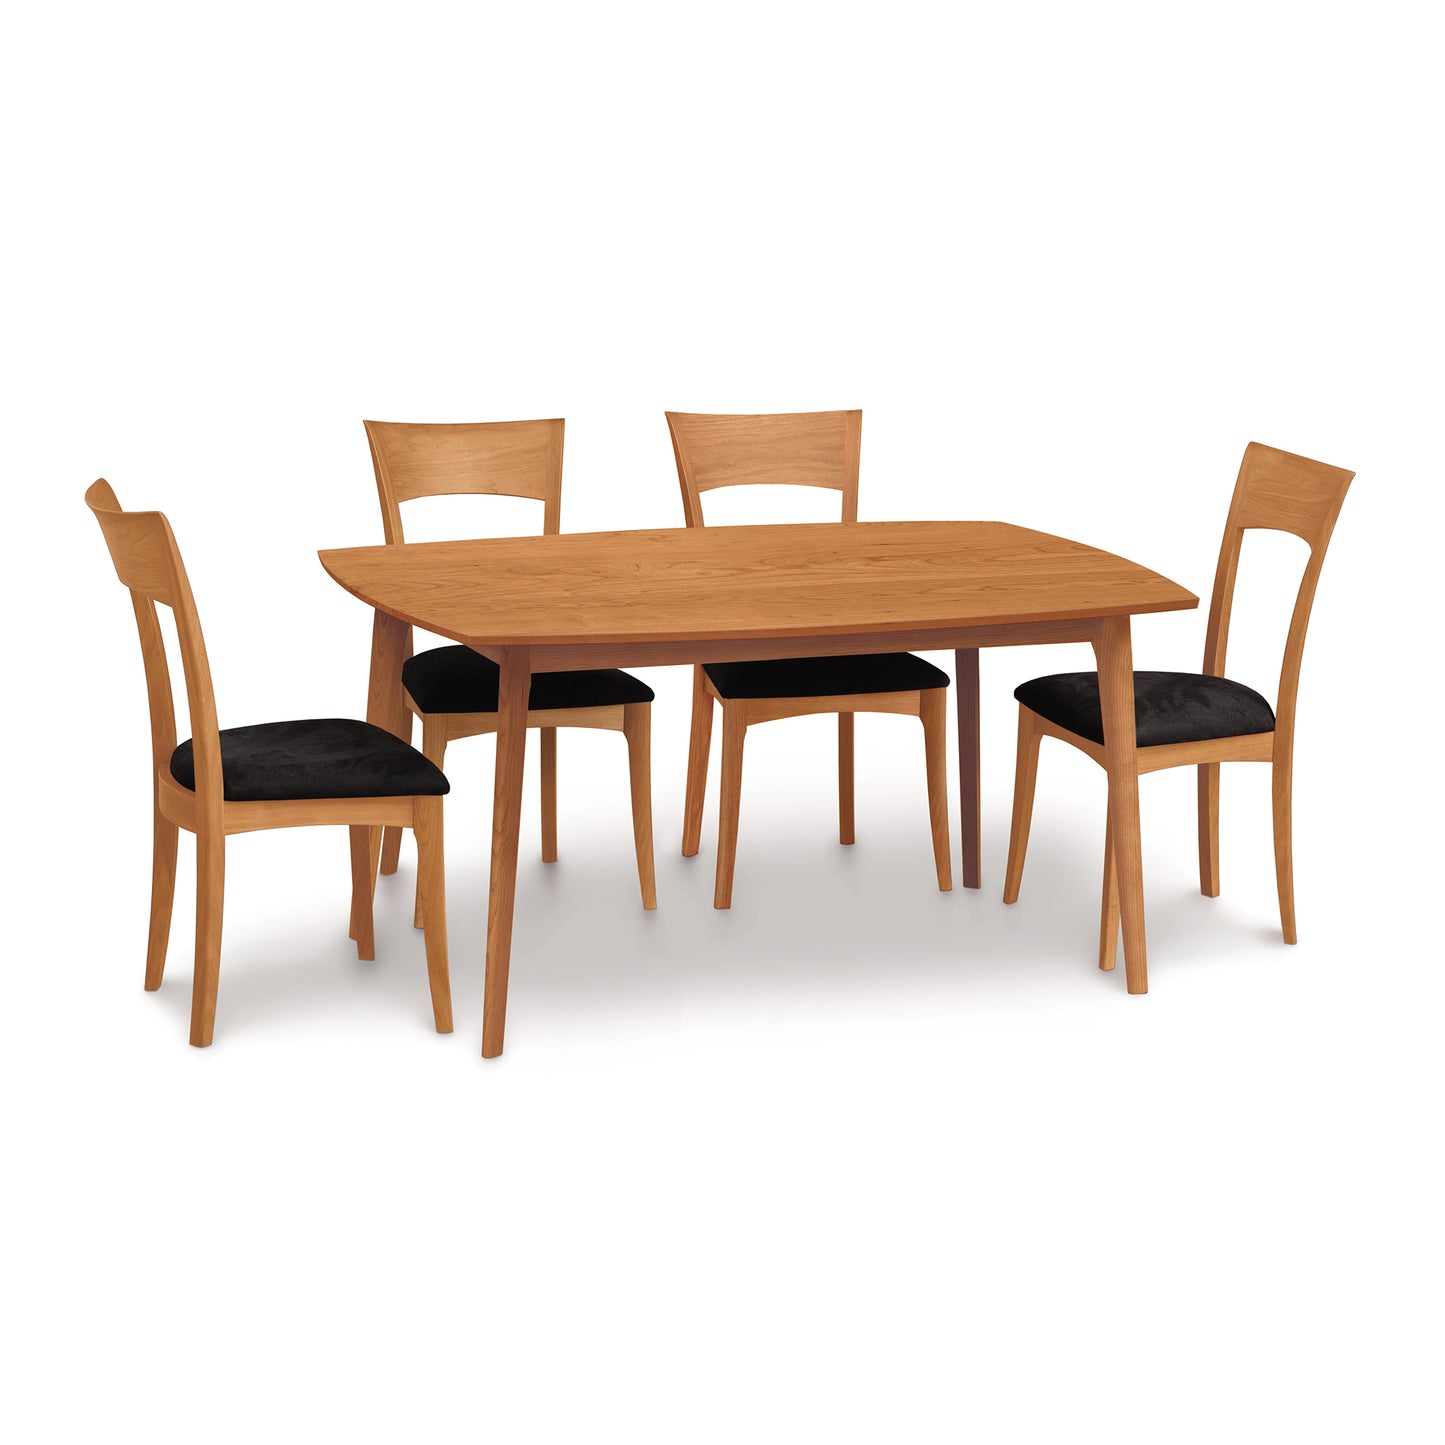 A Catalina Solid-Top Table from Copeland Furniture, with four chairs featuring black cushions, isolated on a white background.